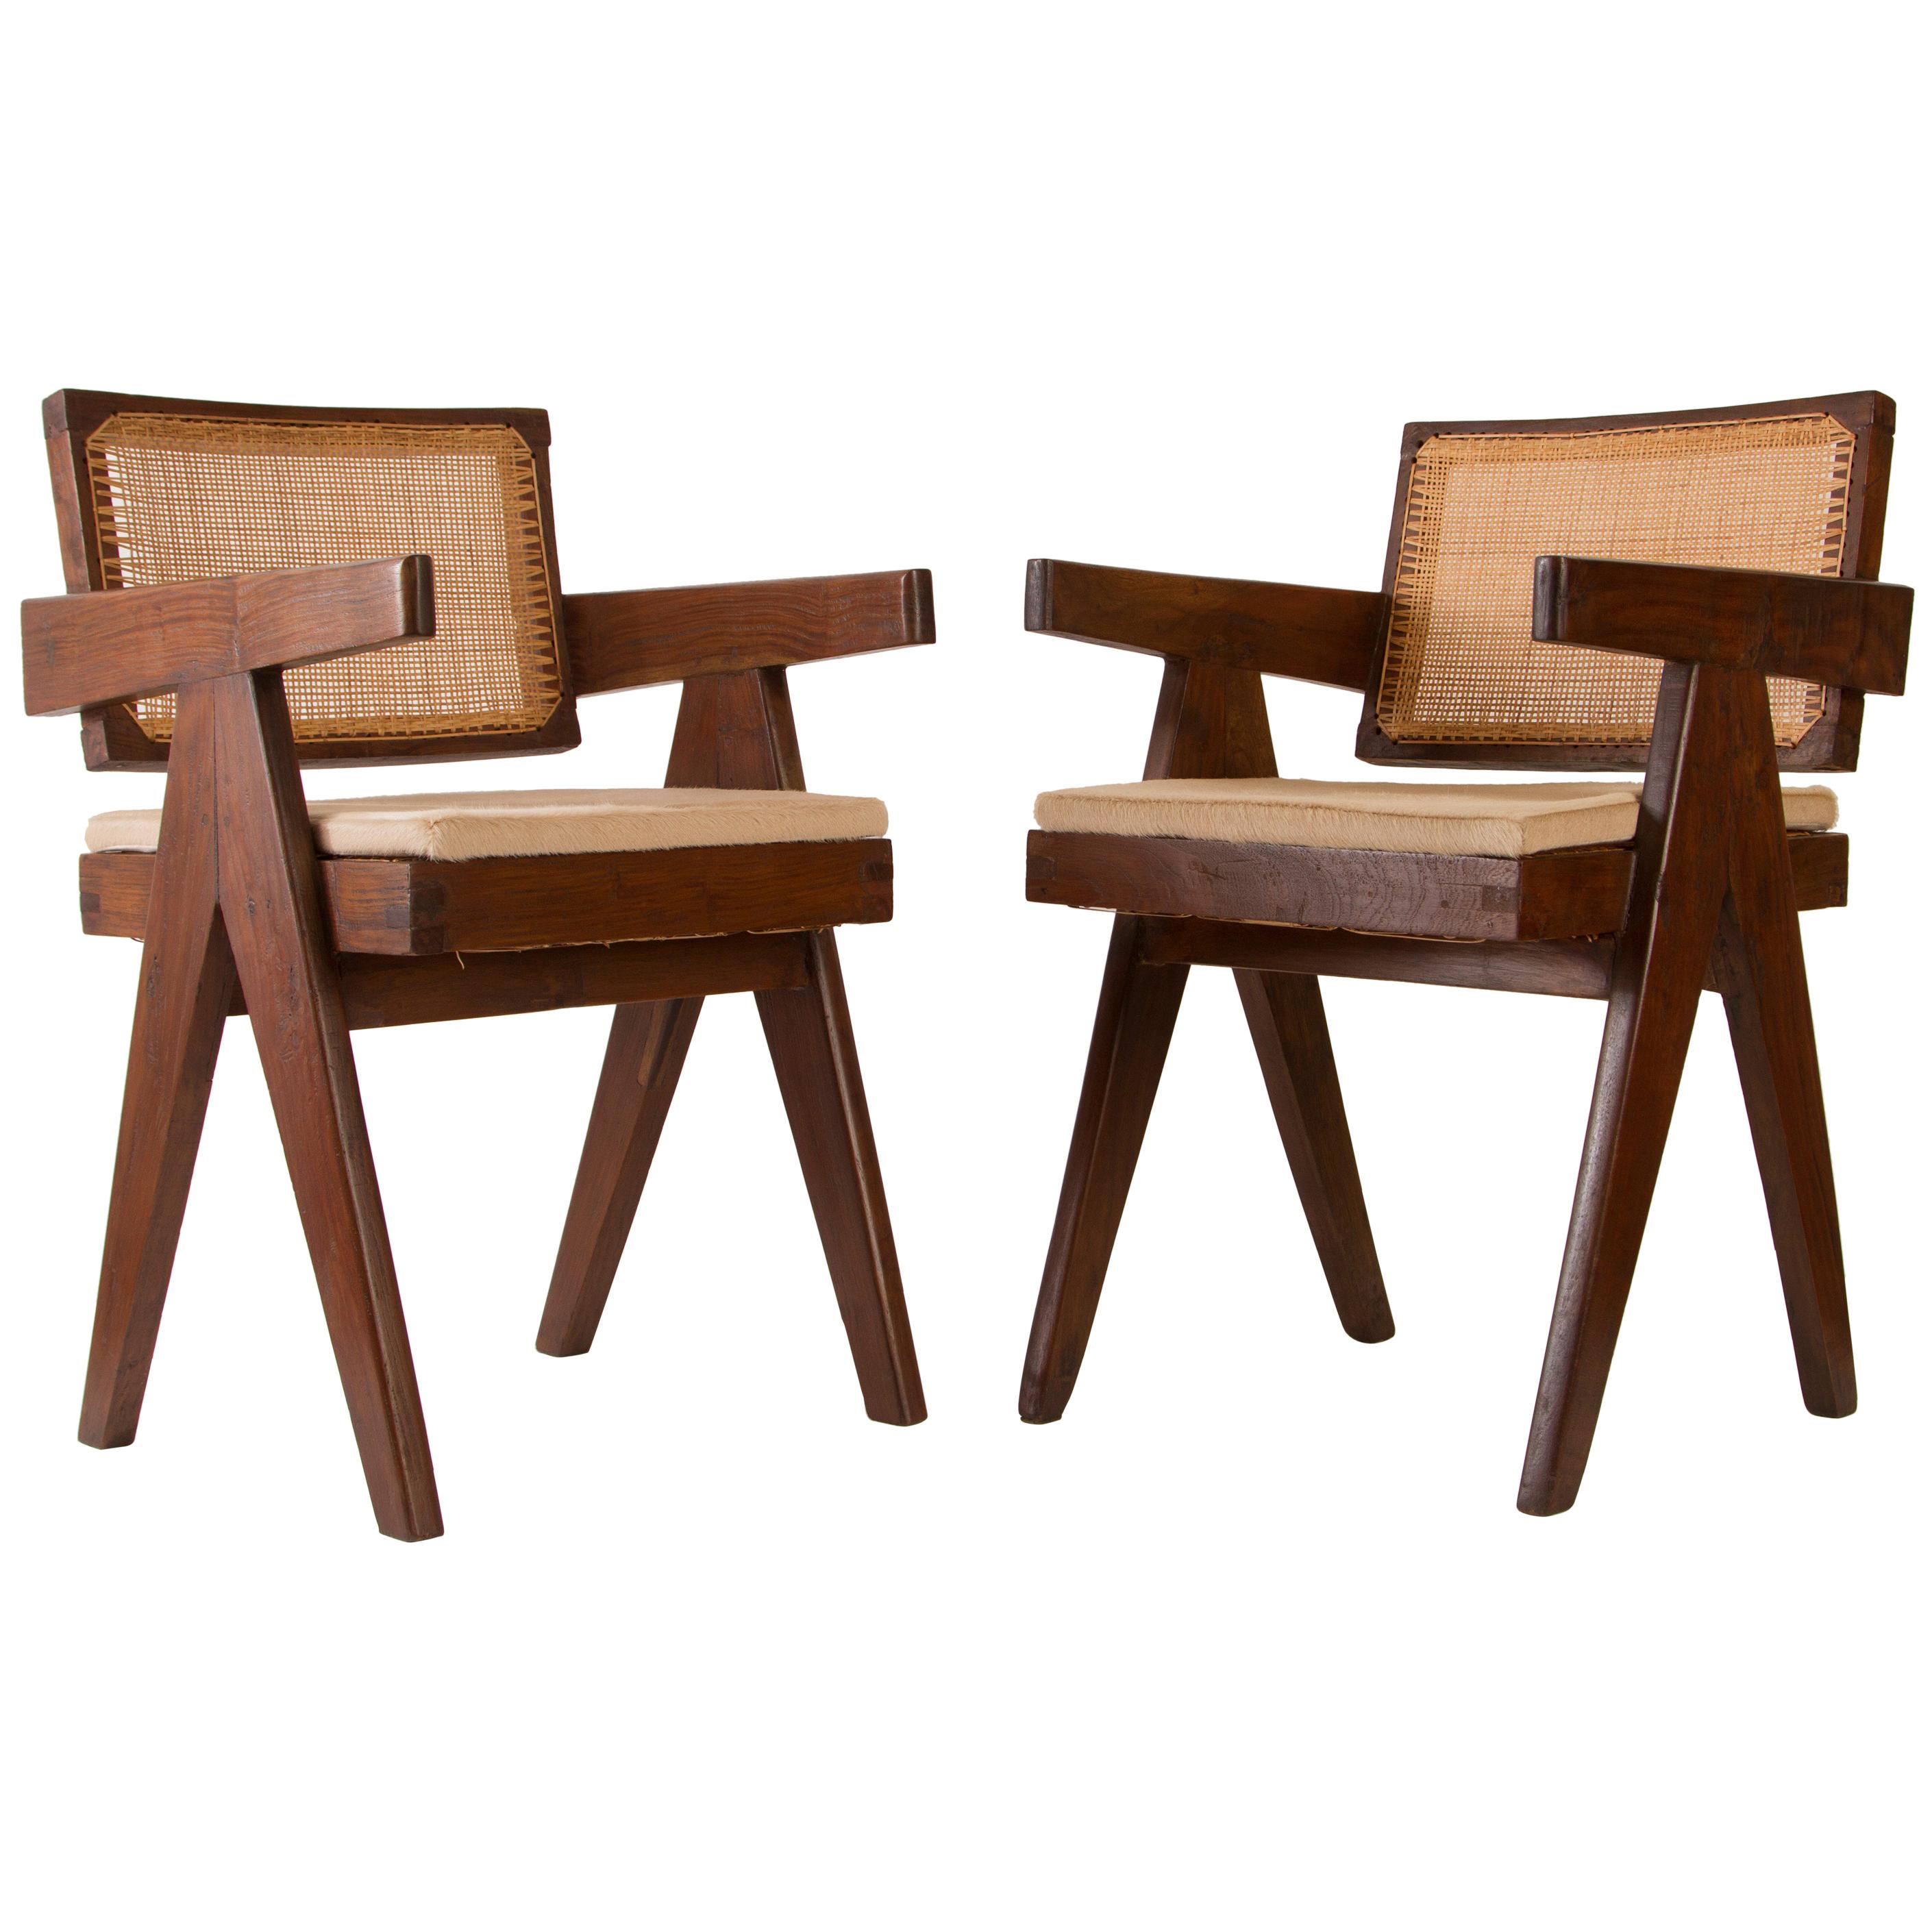 Pierre Jeanneret Pair of Floating Back Office Chairs, Circa 1959